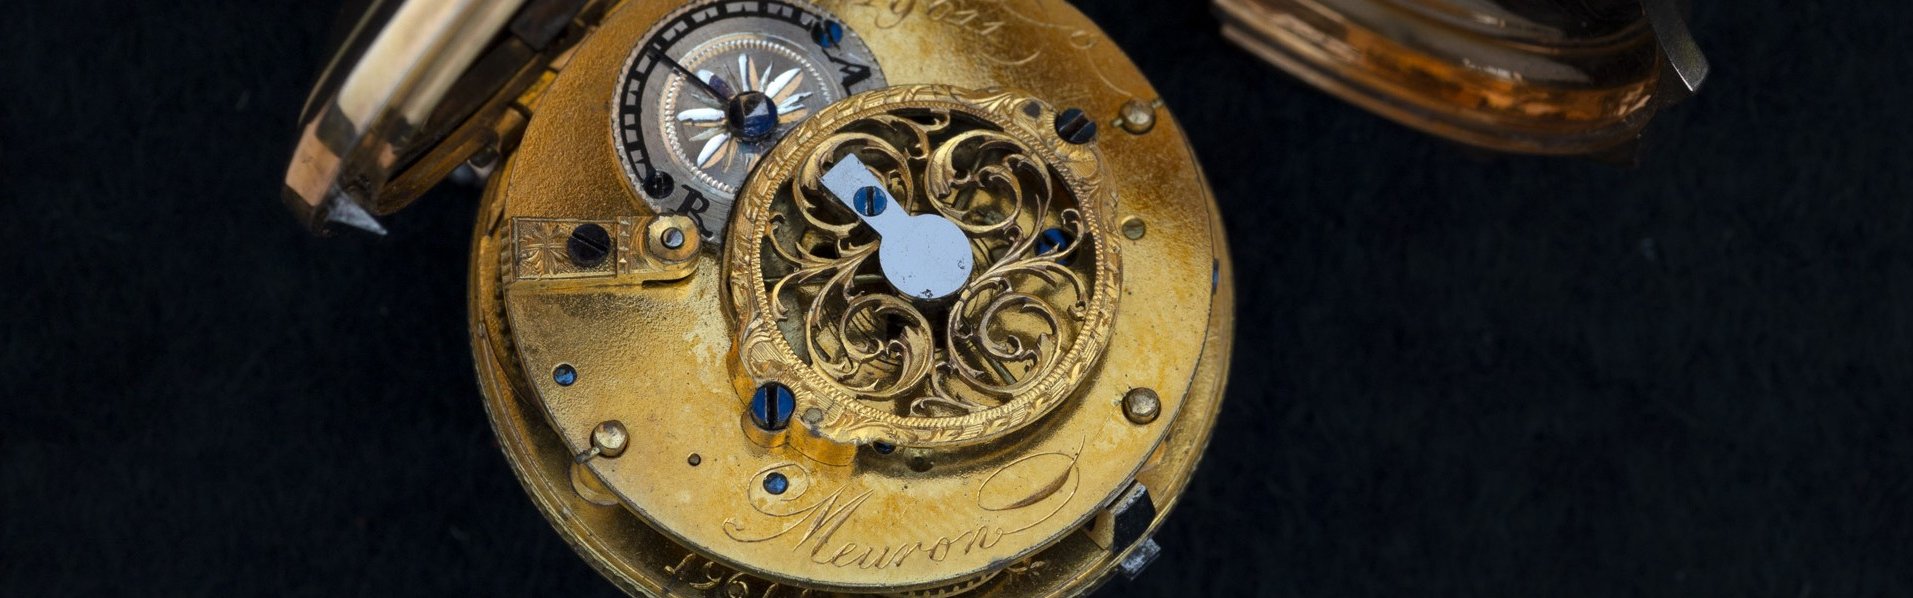 WATCHMAKING AND SILVERWARE